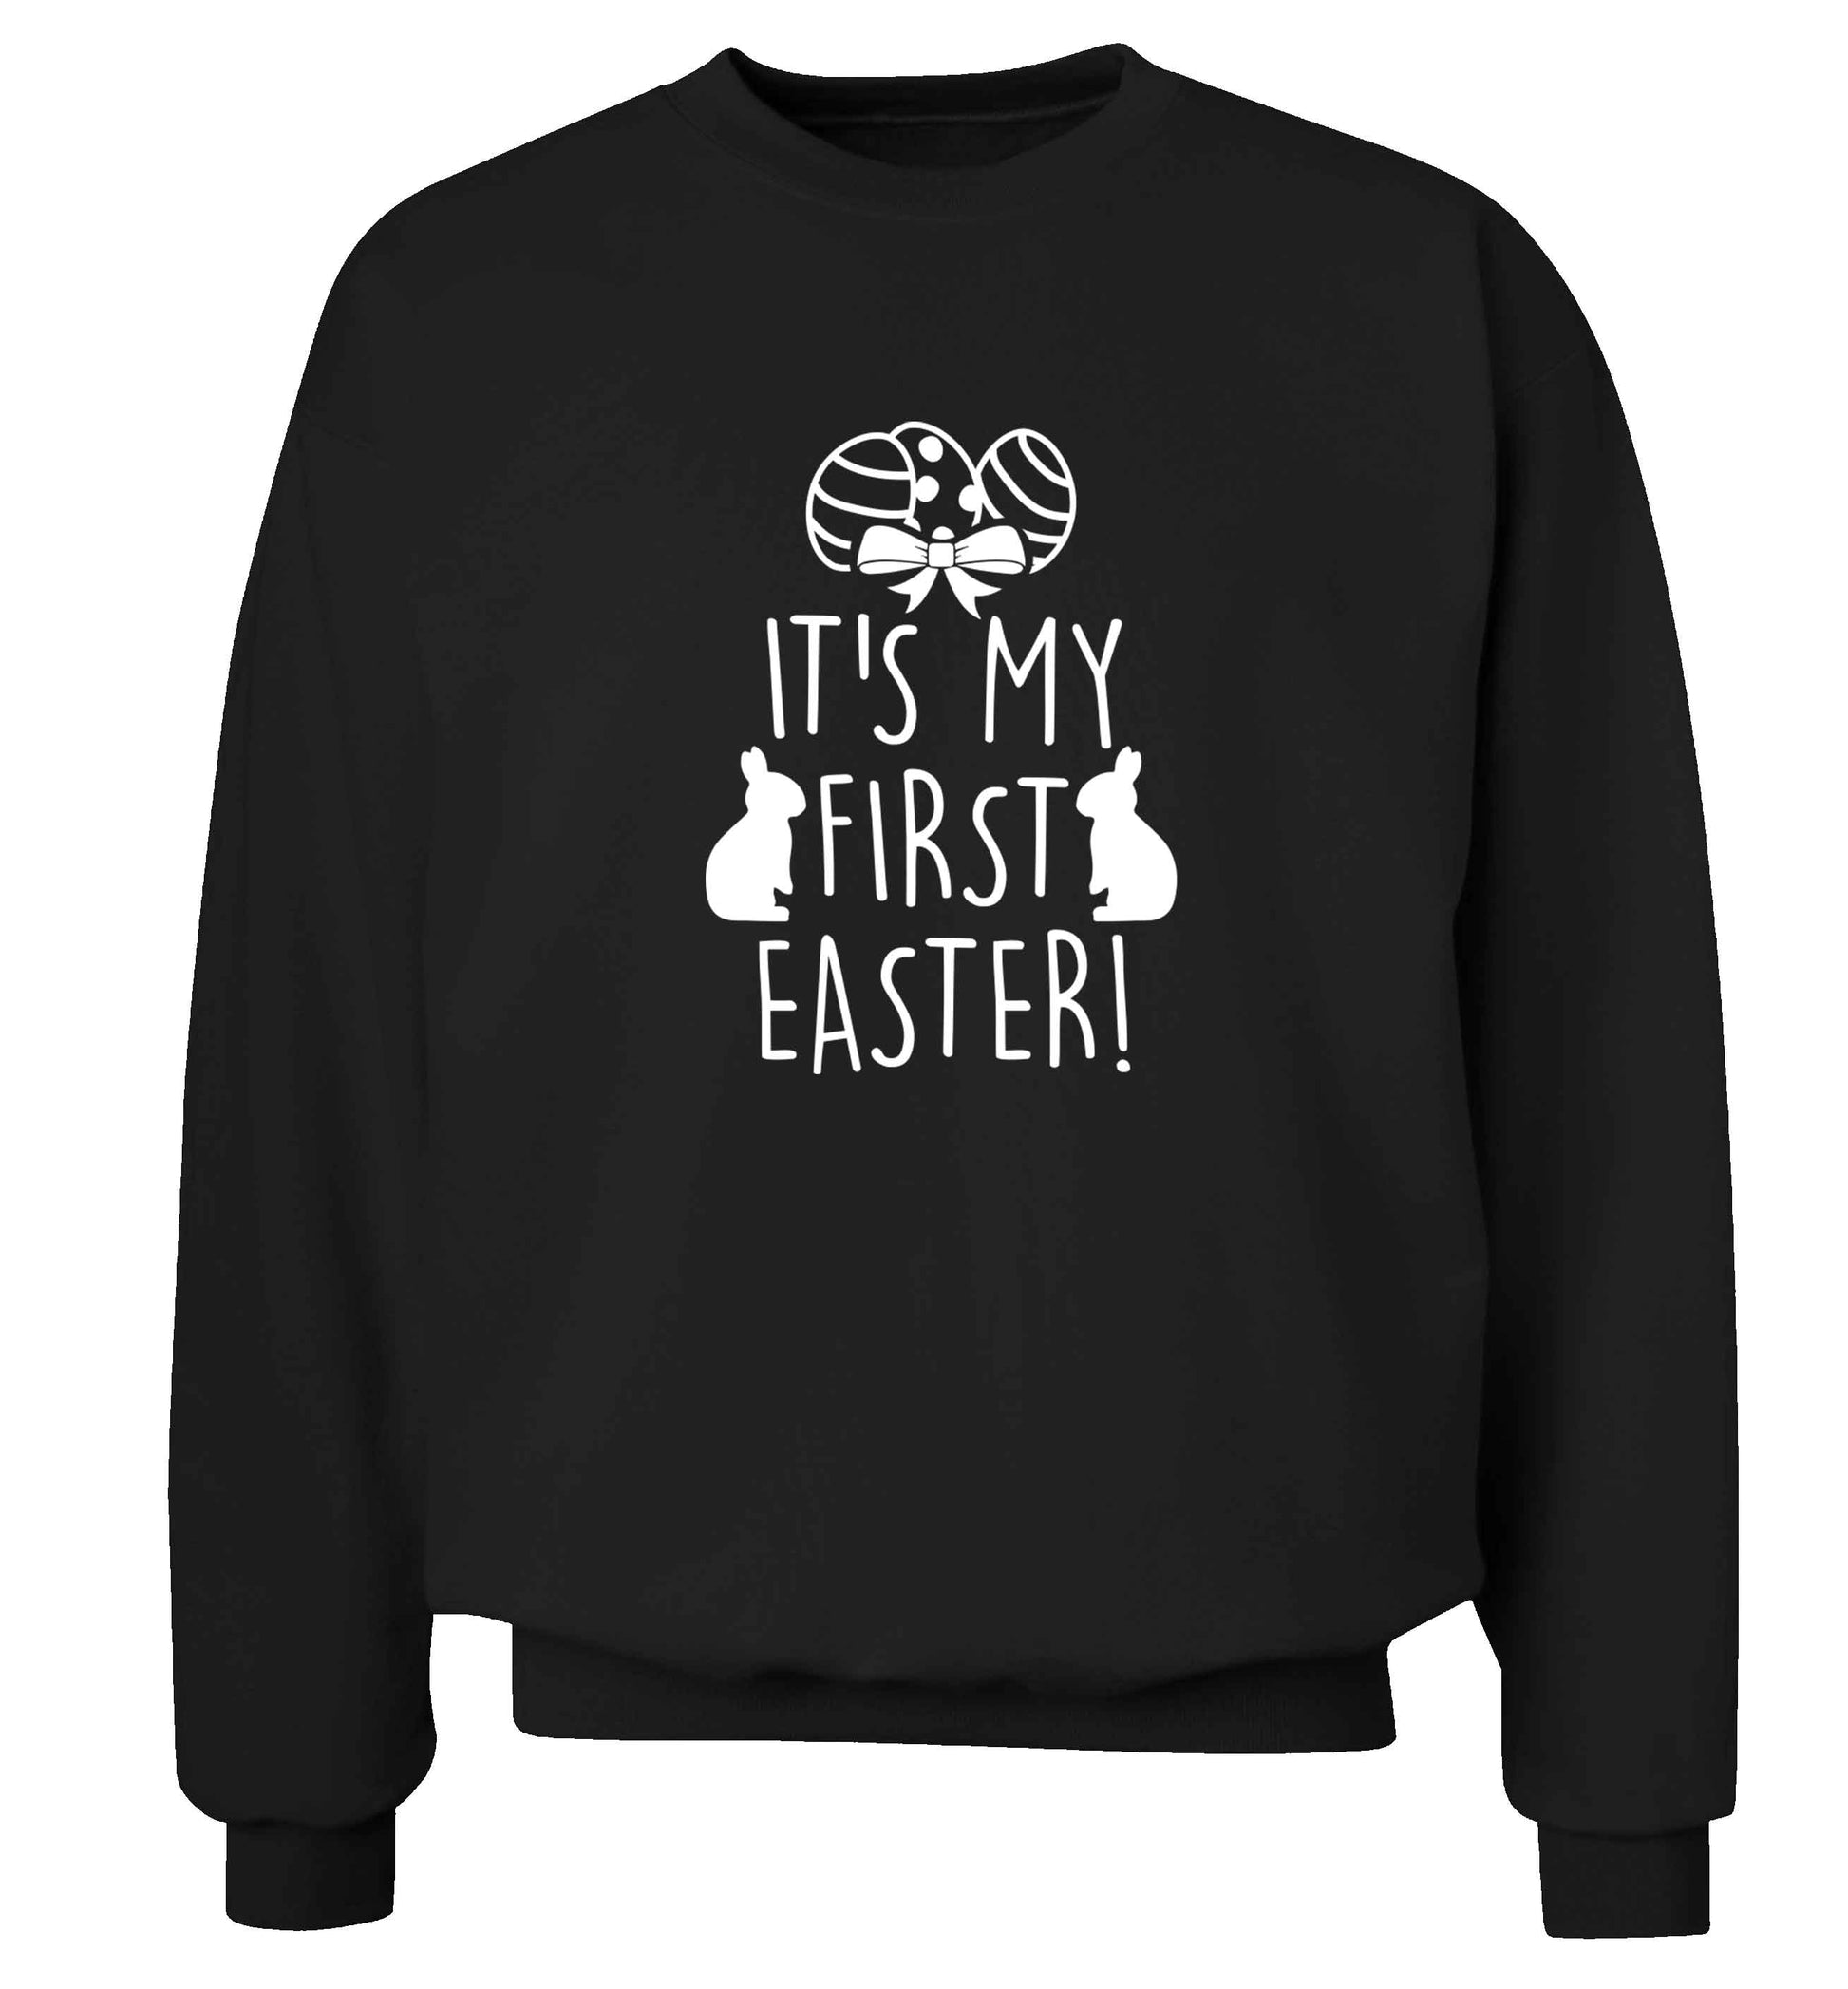 It's my first Easter adult's unisex black sweater 2XL